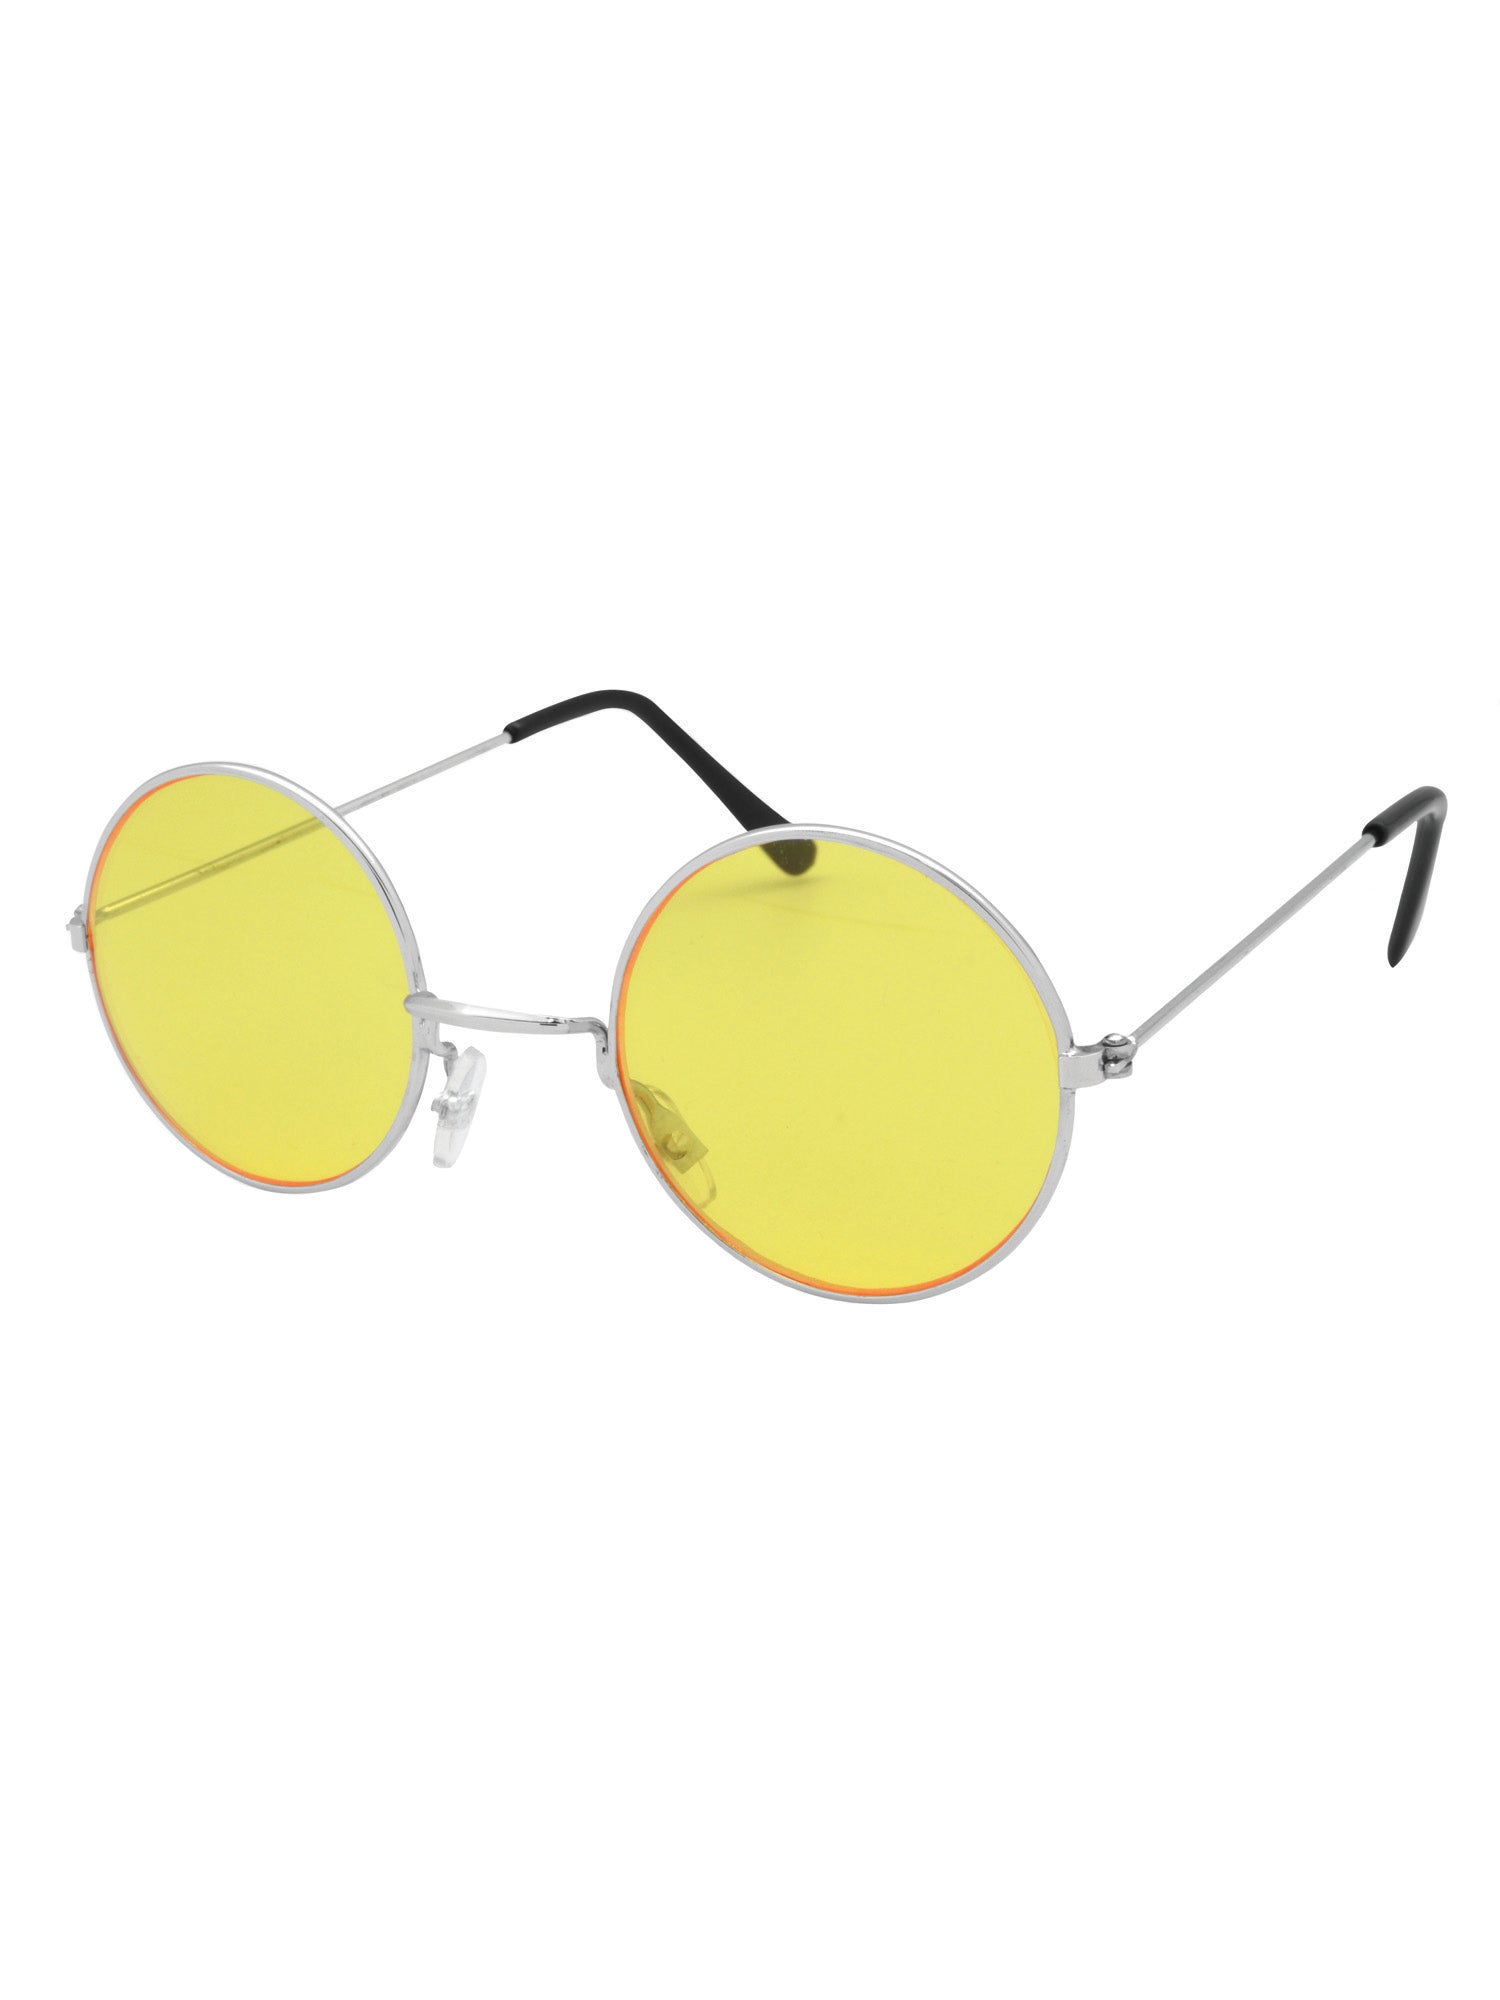 Glasses, Yellow, Generic, Accessories, One Size, Front